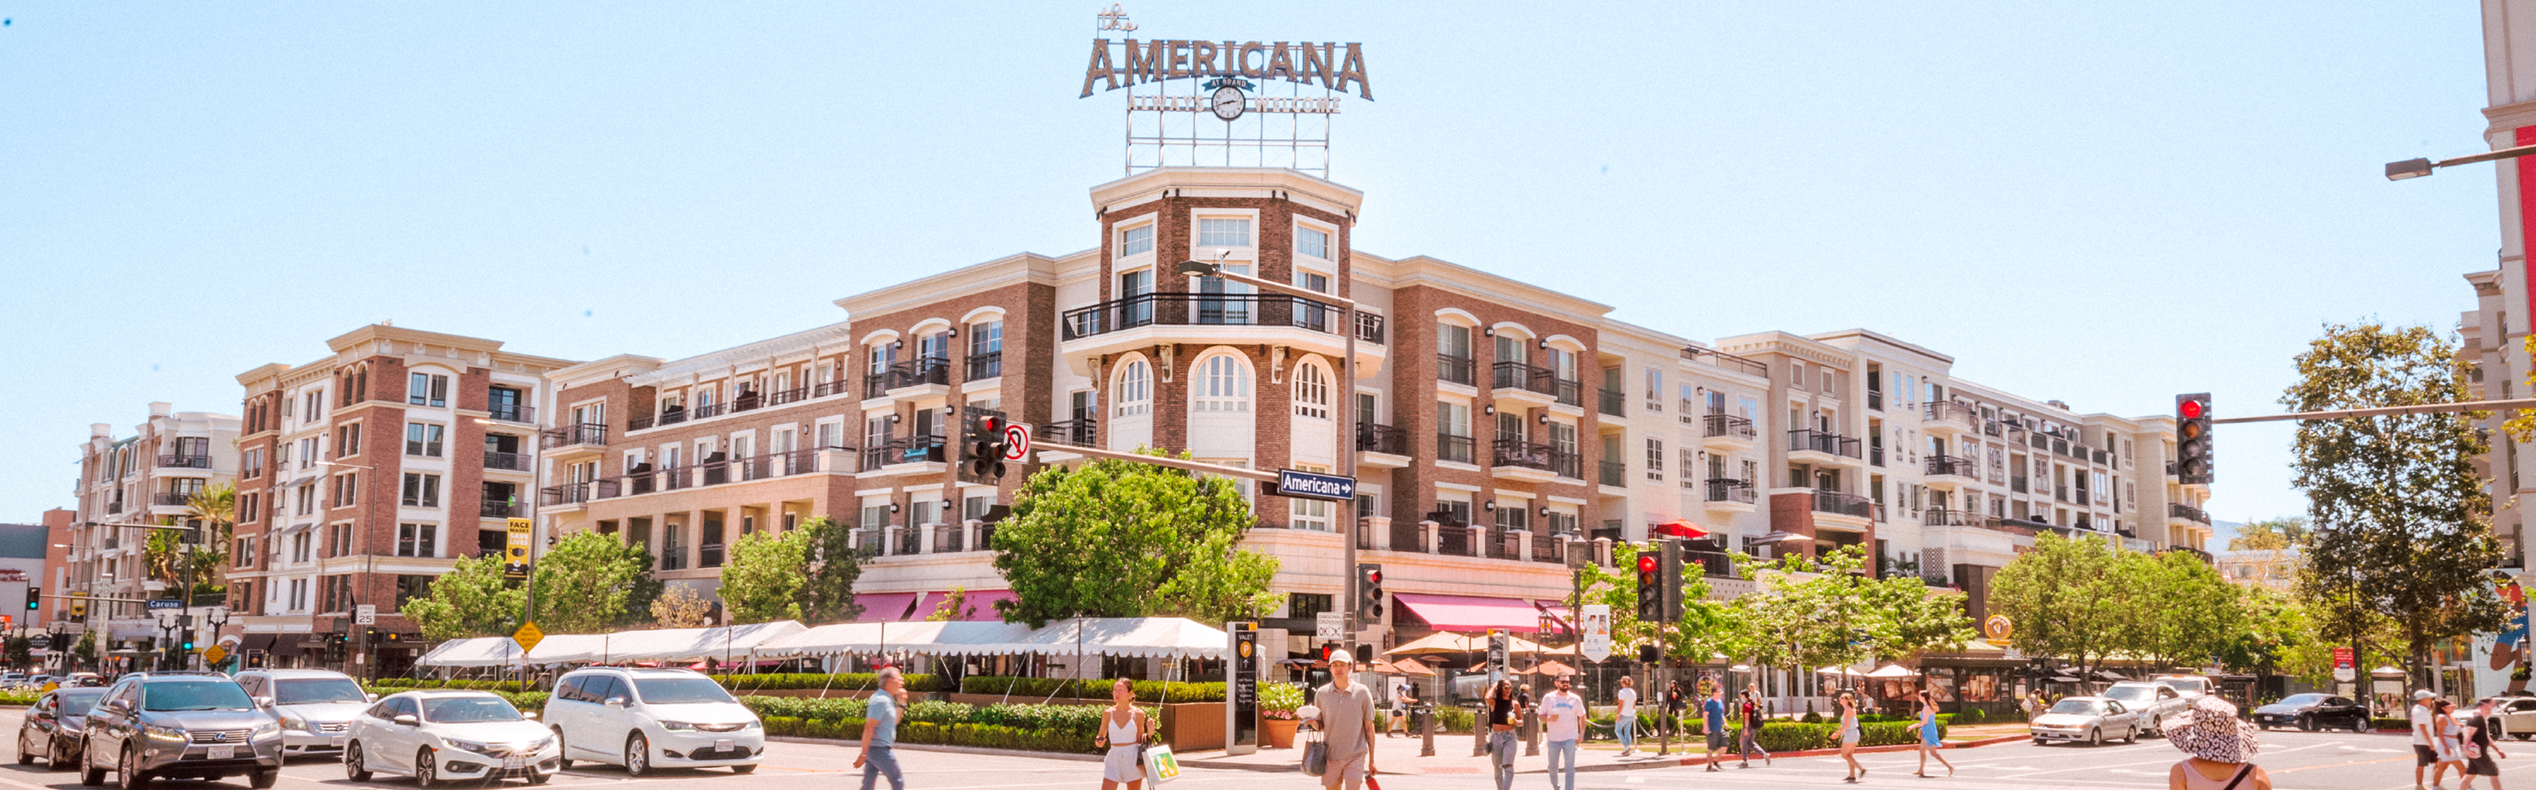 The Best Shopping in Glendale - The Americana at Brand